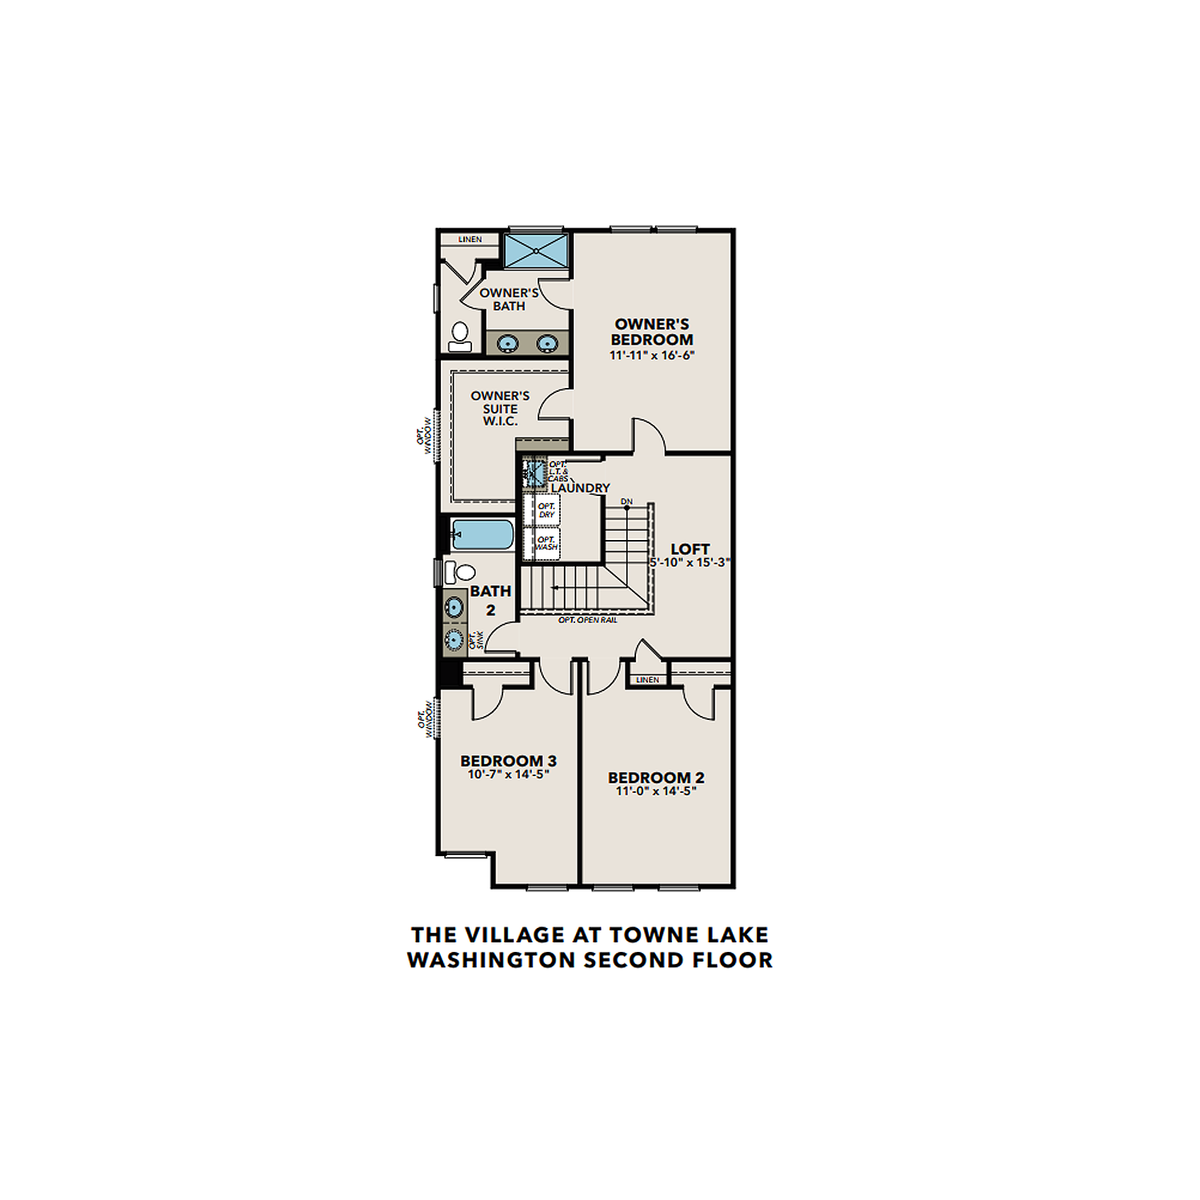 2 - The Washington D floor plan layout for 725 Stickley Oak Way in Davidson Homes' The Village at Towne Lake community.